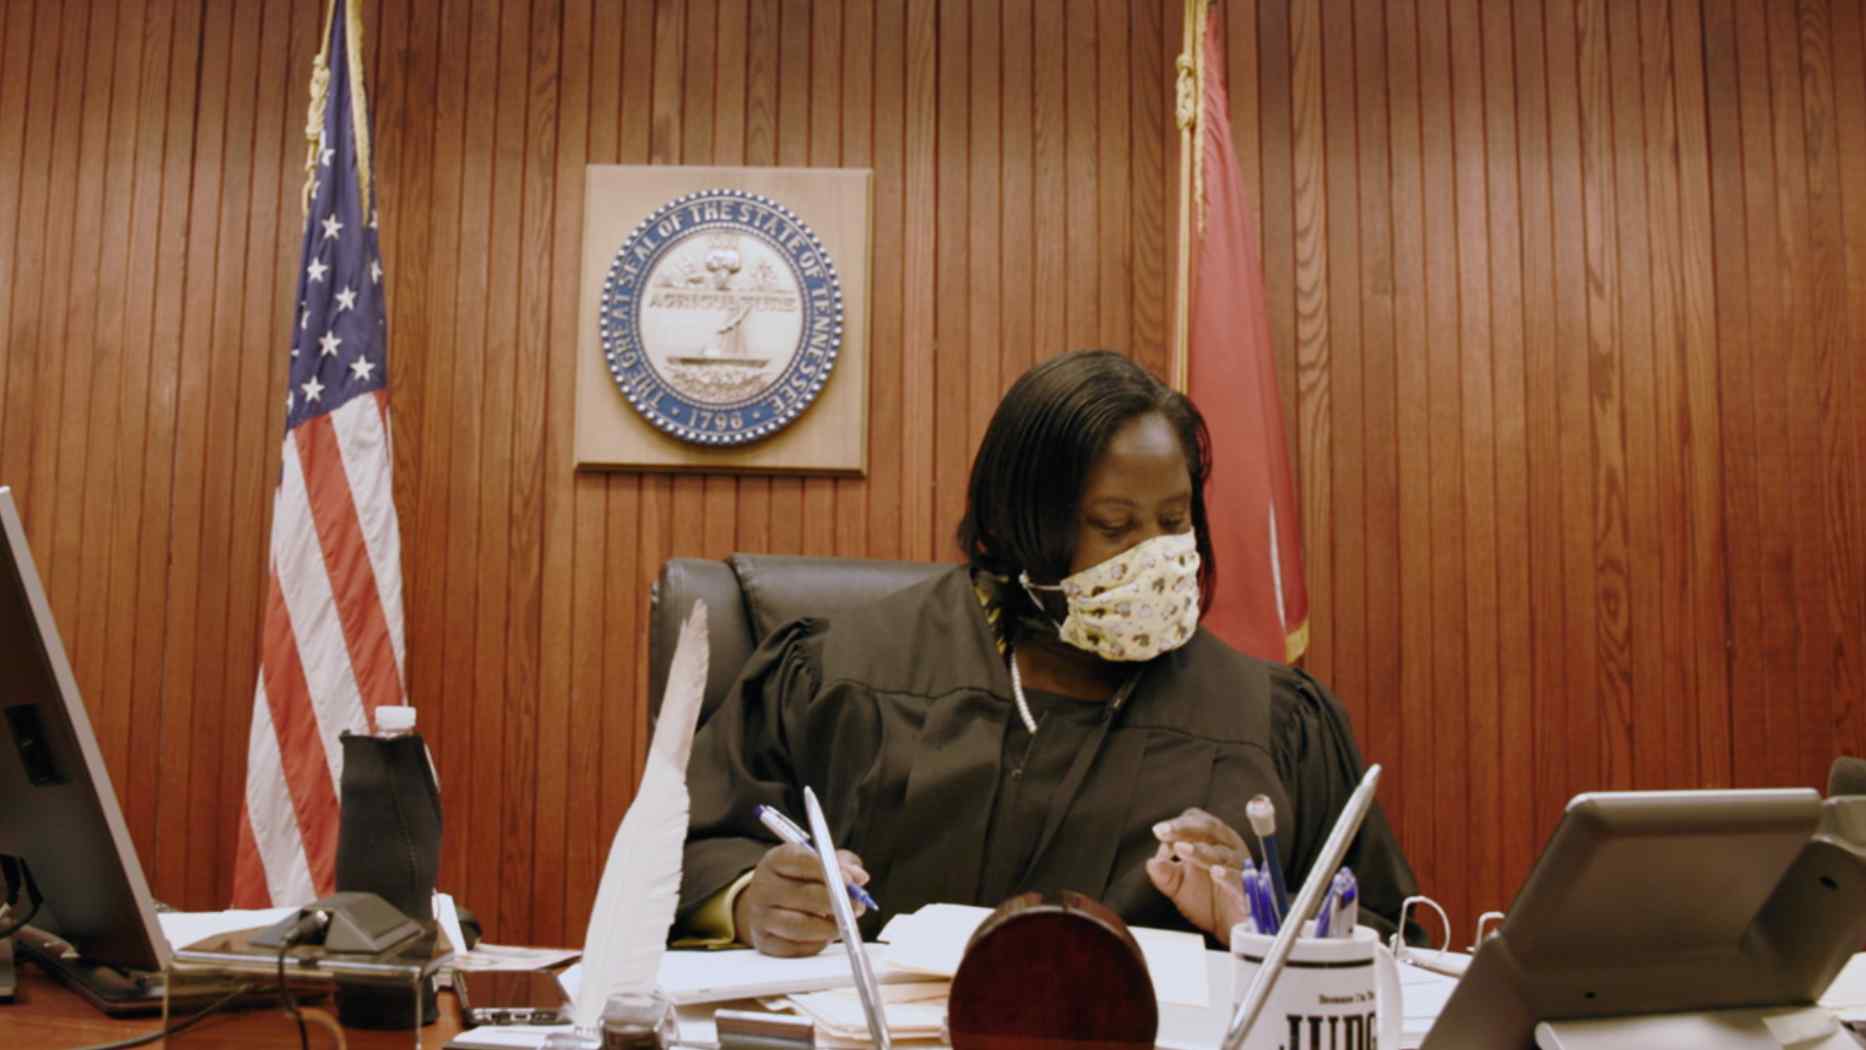 'Justice, USA' Exclusive Preview: A Judge Helps Nashville's Youth Stay Out Of The System In Max Docuseries